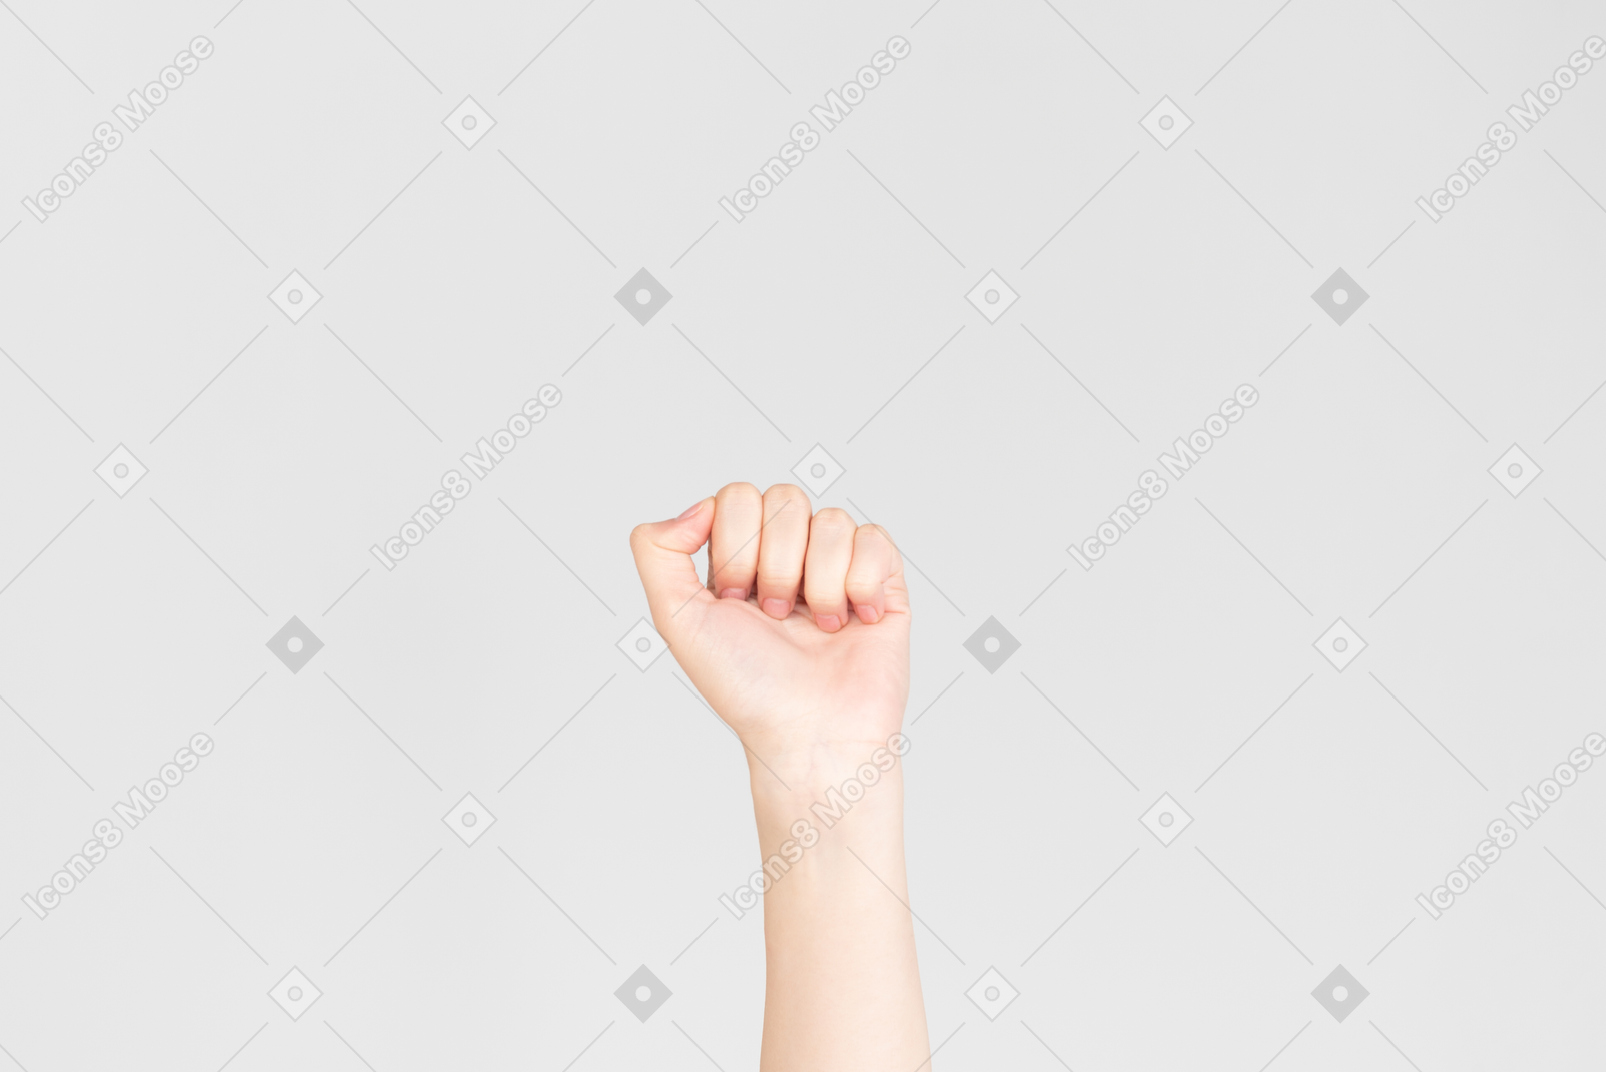 Female hand clenched in fist